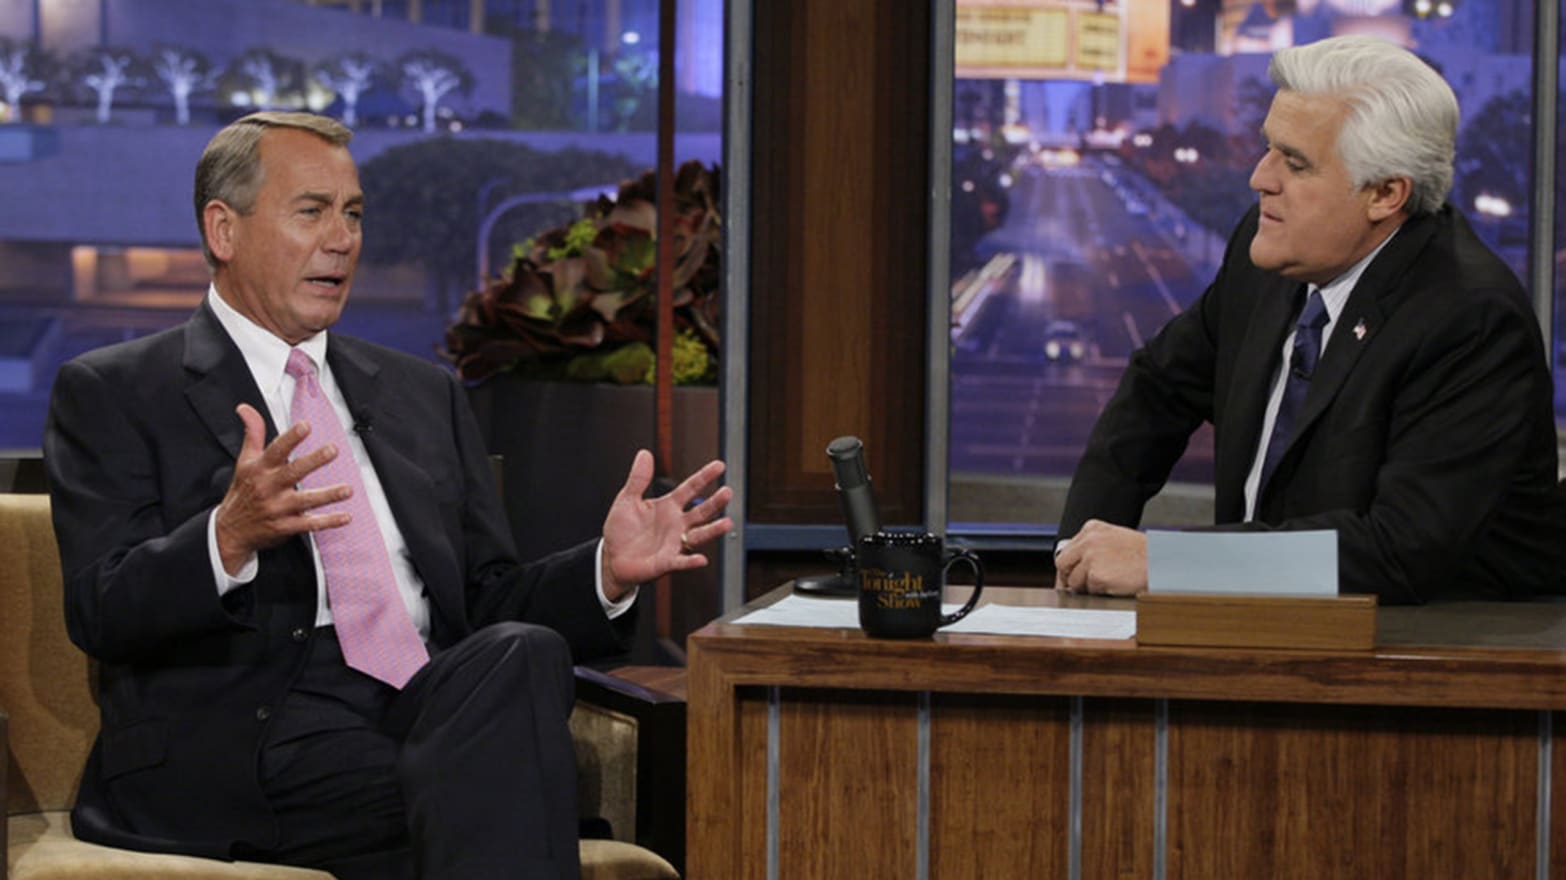 John Boehner Live and Unhinged with Jay Leno